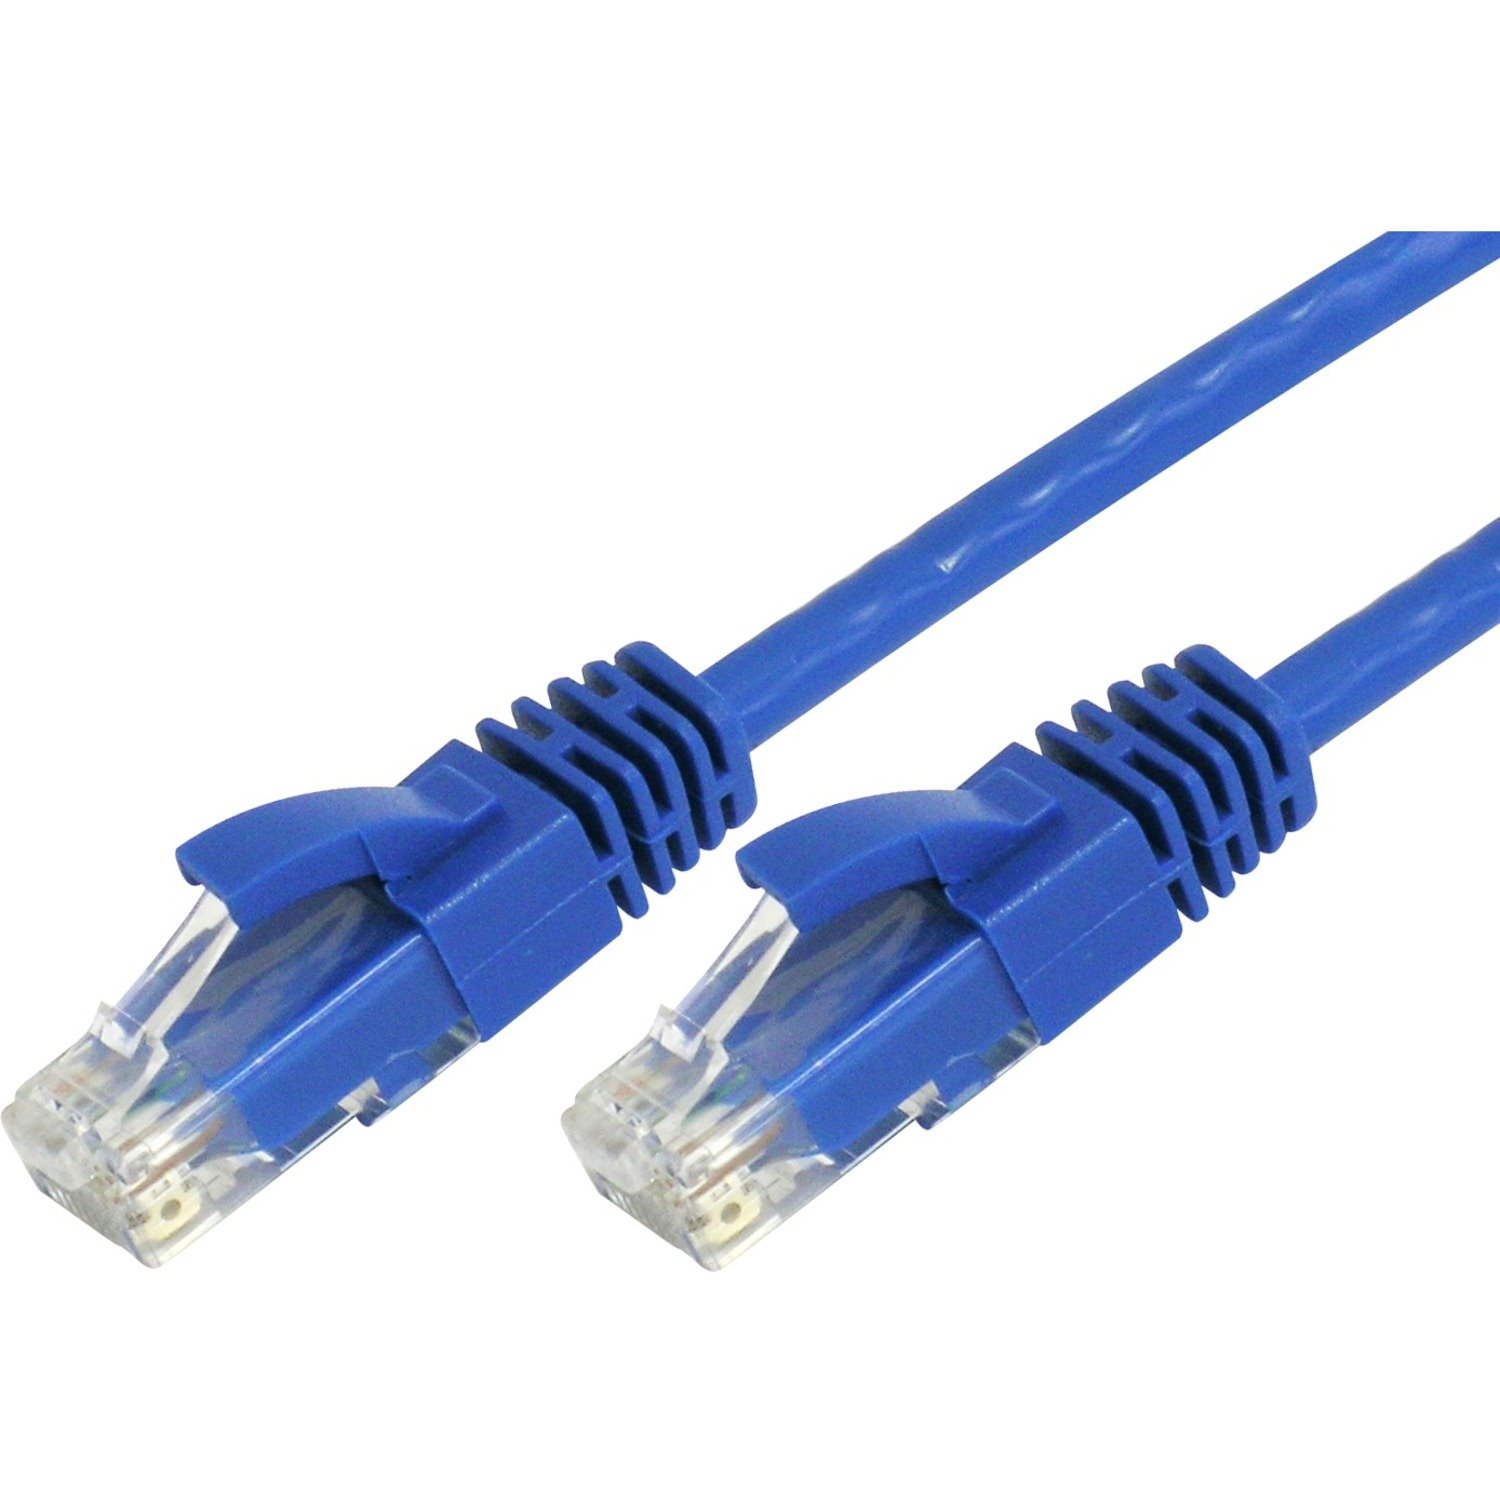 Comsol 25 m Category 5e Network Cable for Hub, Switch, Router, Modem, Patch Panel, Network Device